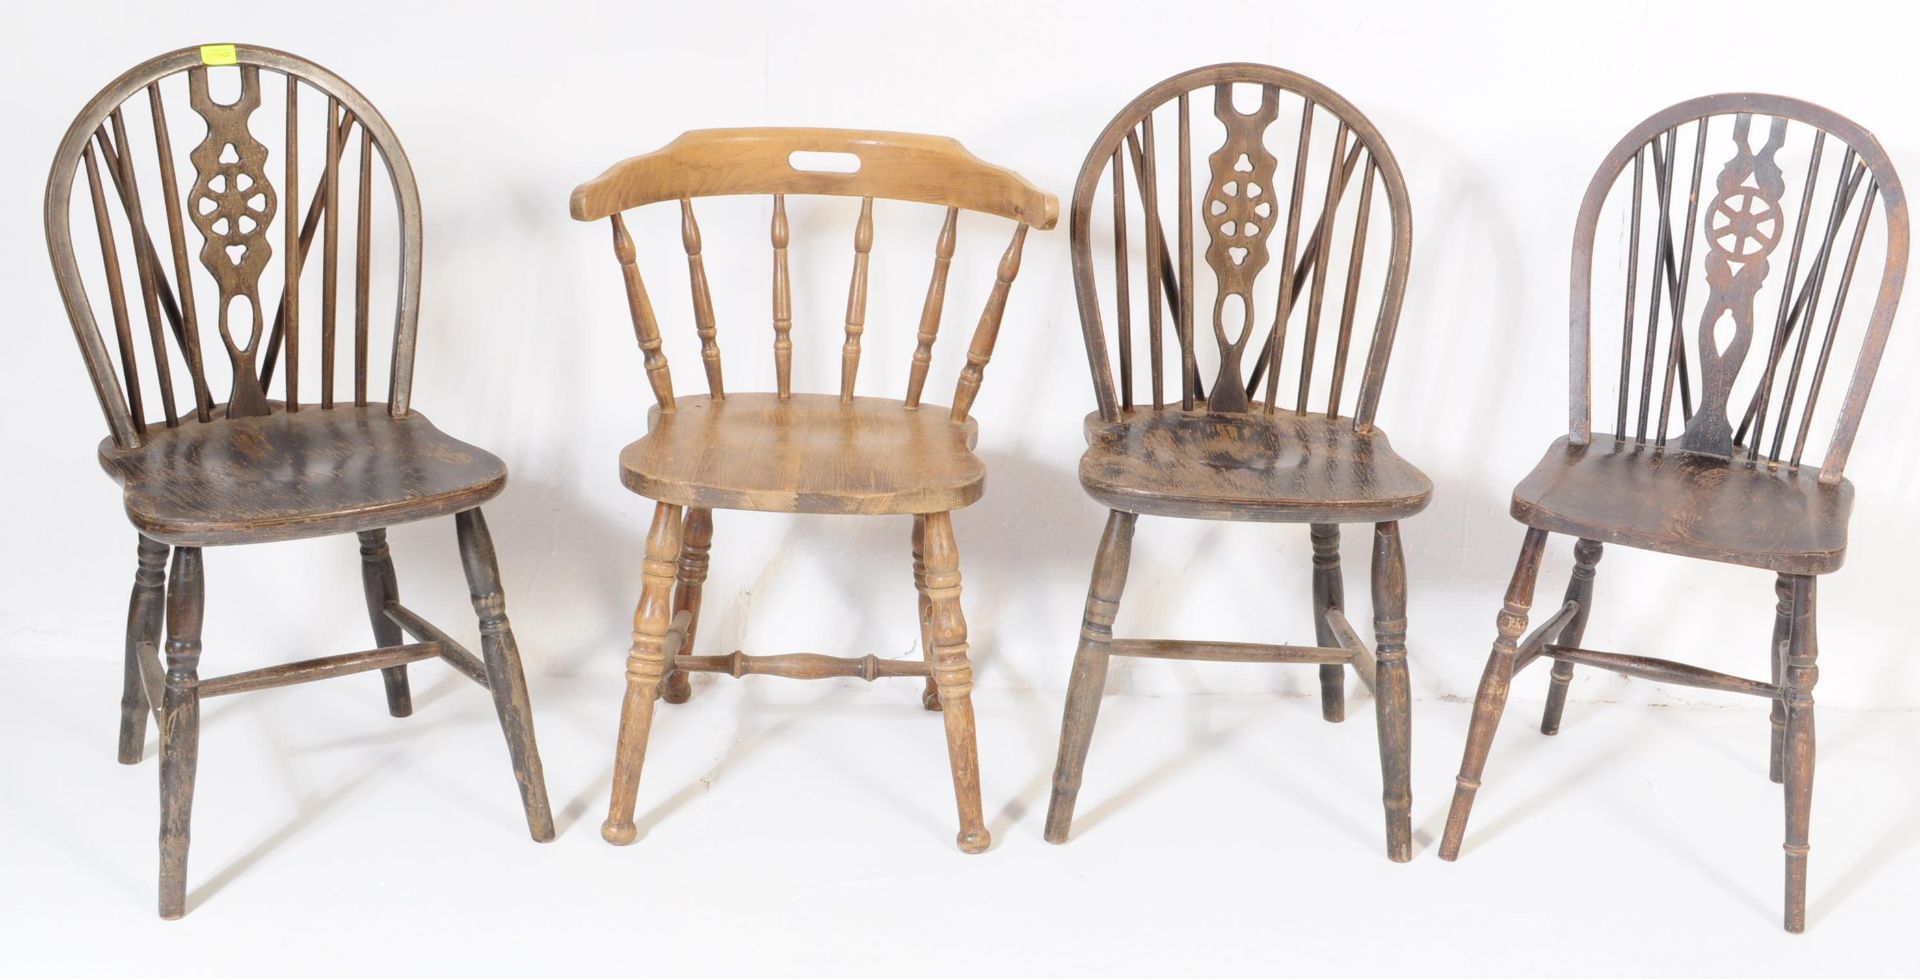 EARLY 20TH CENTURY OAK WINDSOR WHEEL BACK CHAIRS - Image 2 of 5